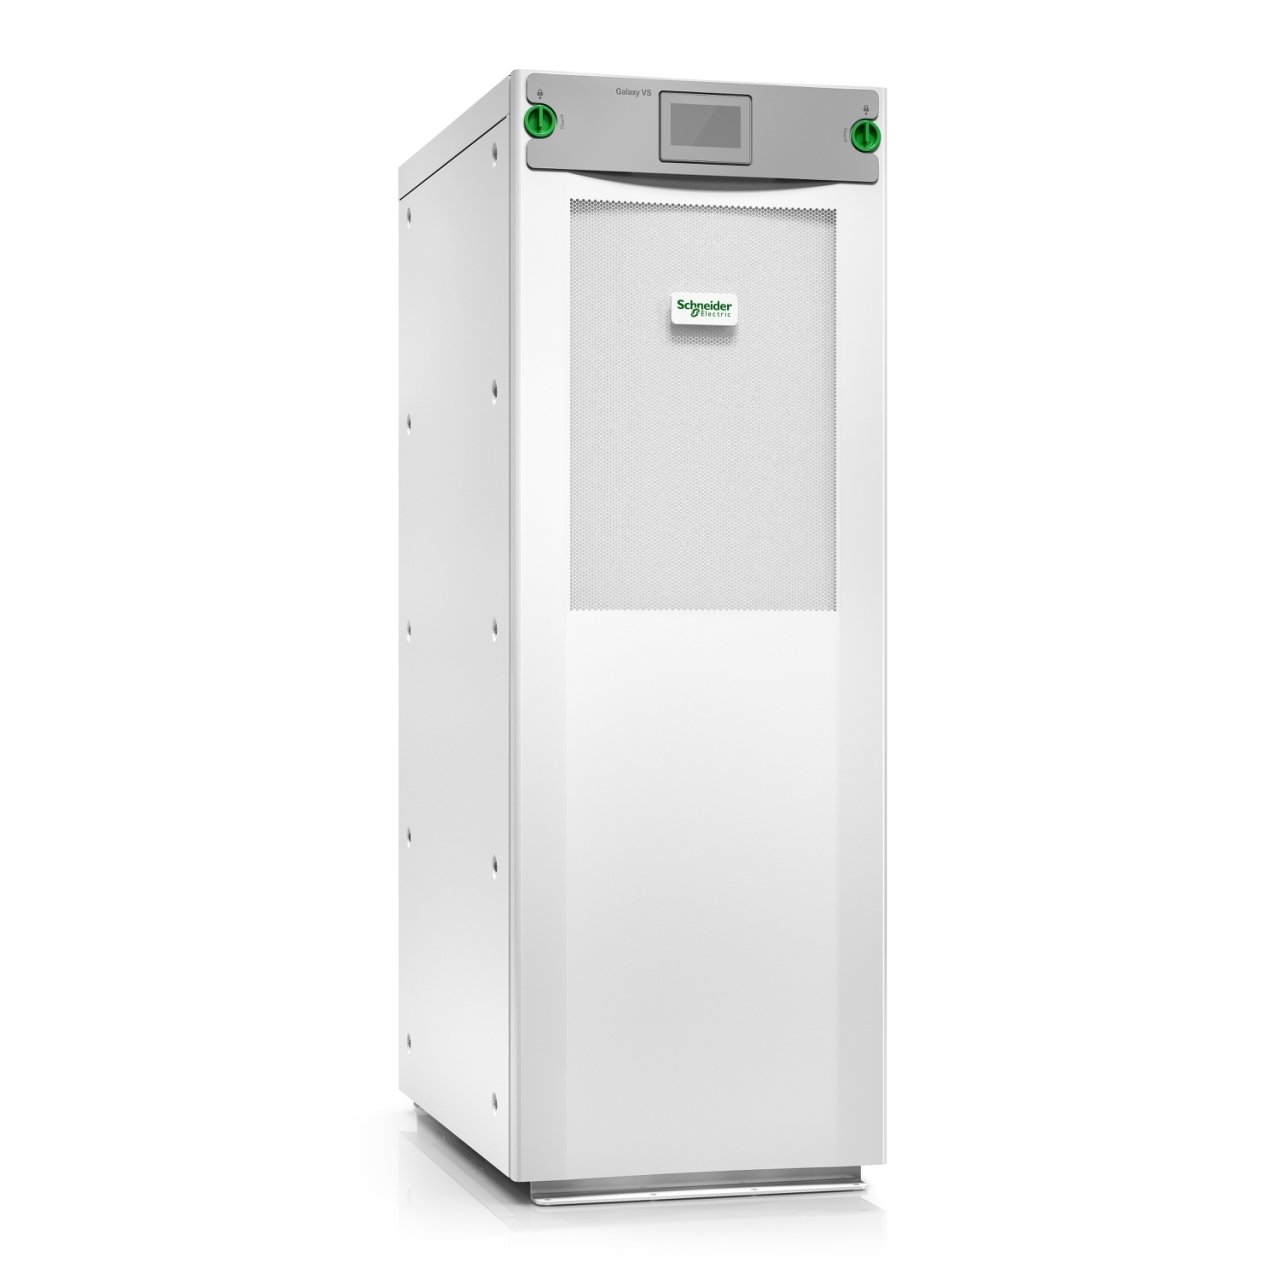 Galaxy VS UPS 40kW 480V with N+1 power module, for 5 smart modular 9Ah battery strings, Start-up 5x8